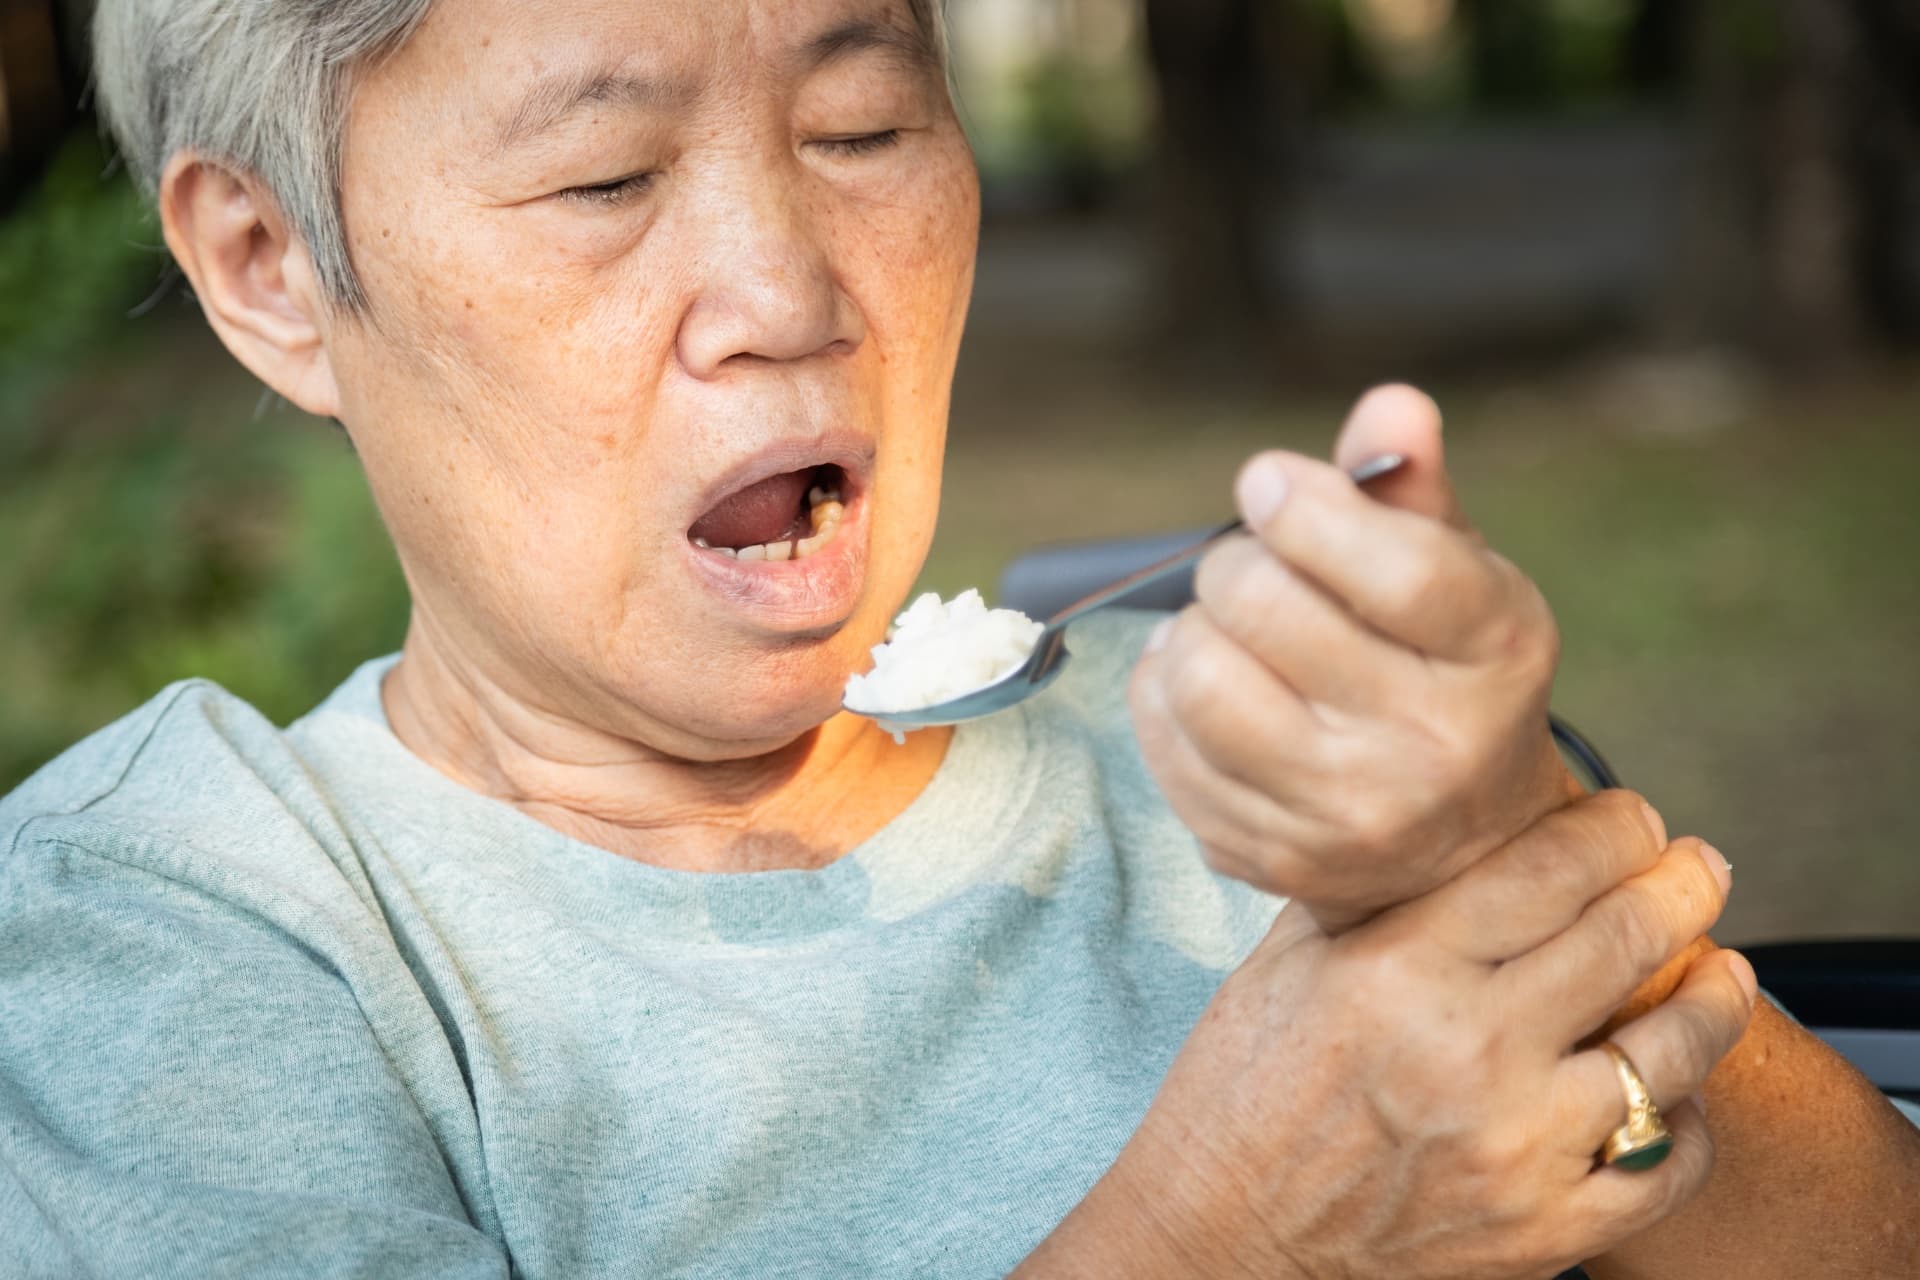 Asian senior woman holding spoon and hands tremor while eating